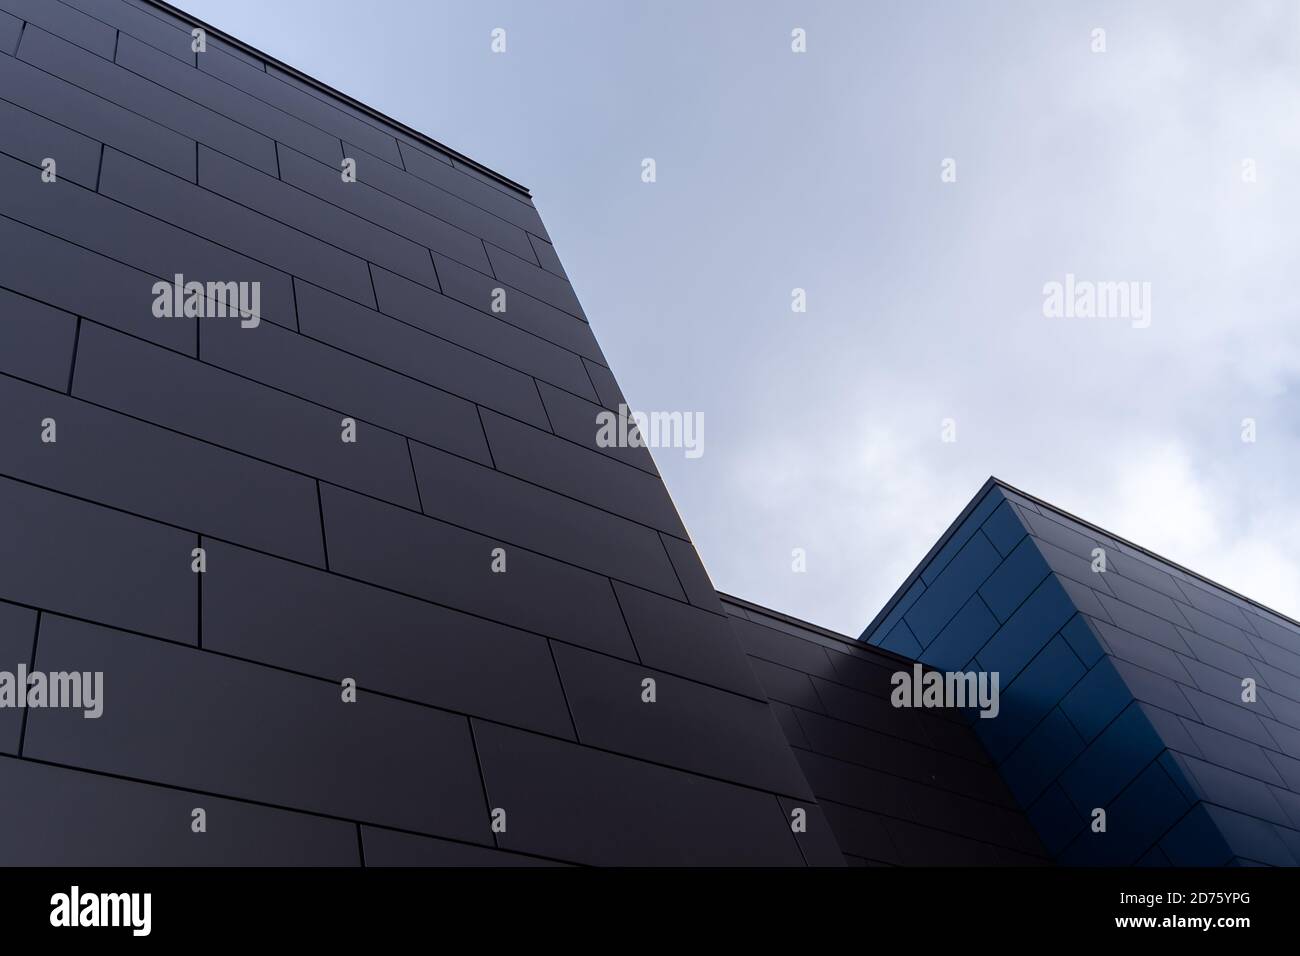 Beige and blue exterior walls of a modern aluminum business building with oblong metal composite panels. Stock Photo